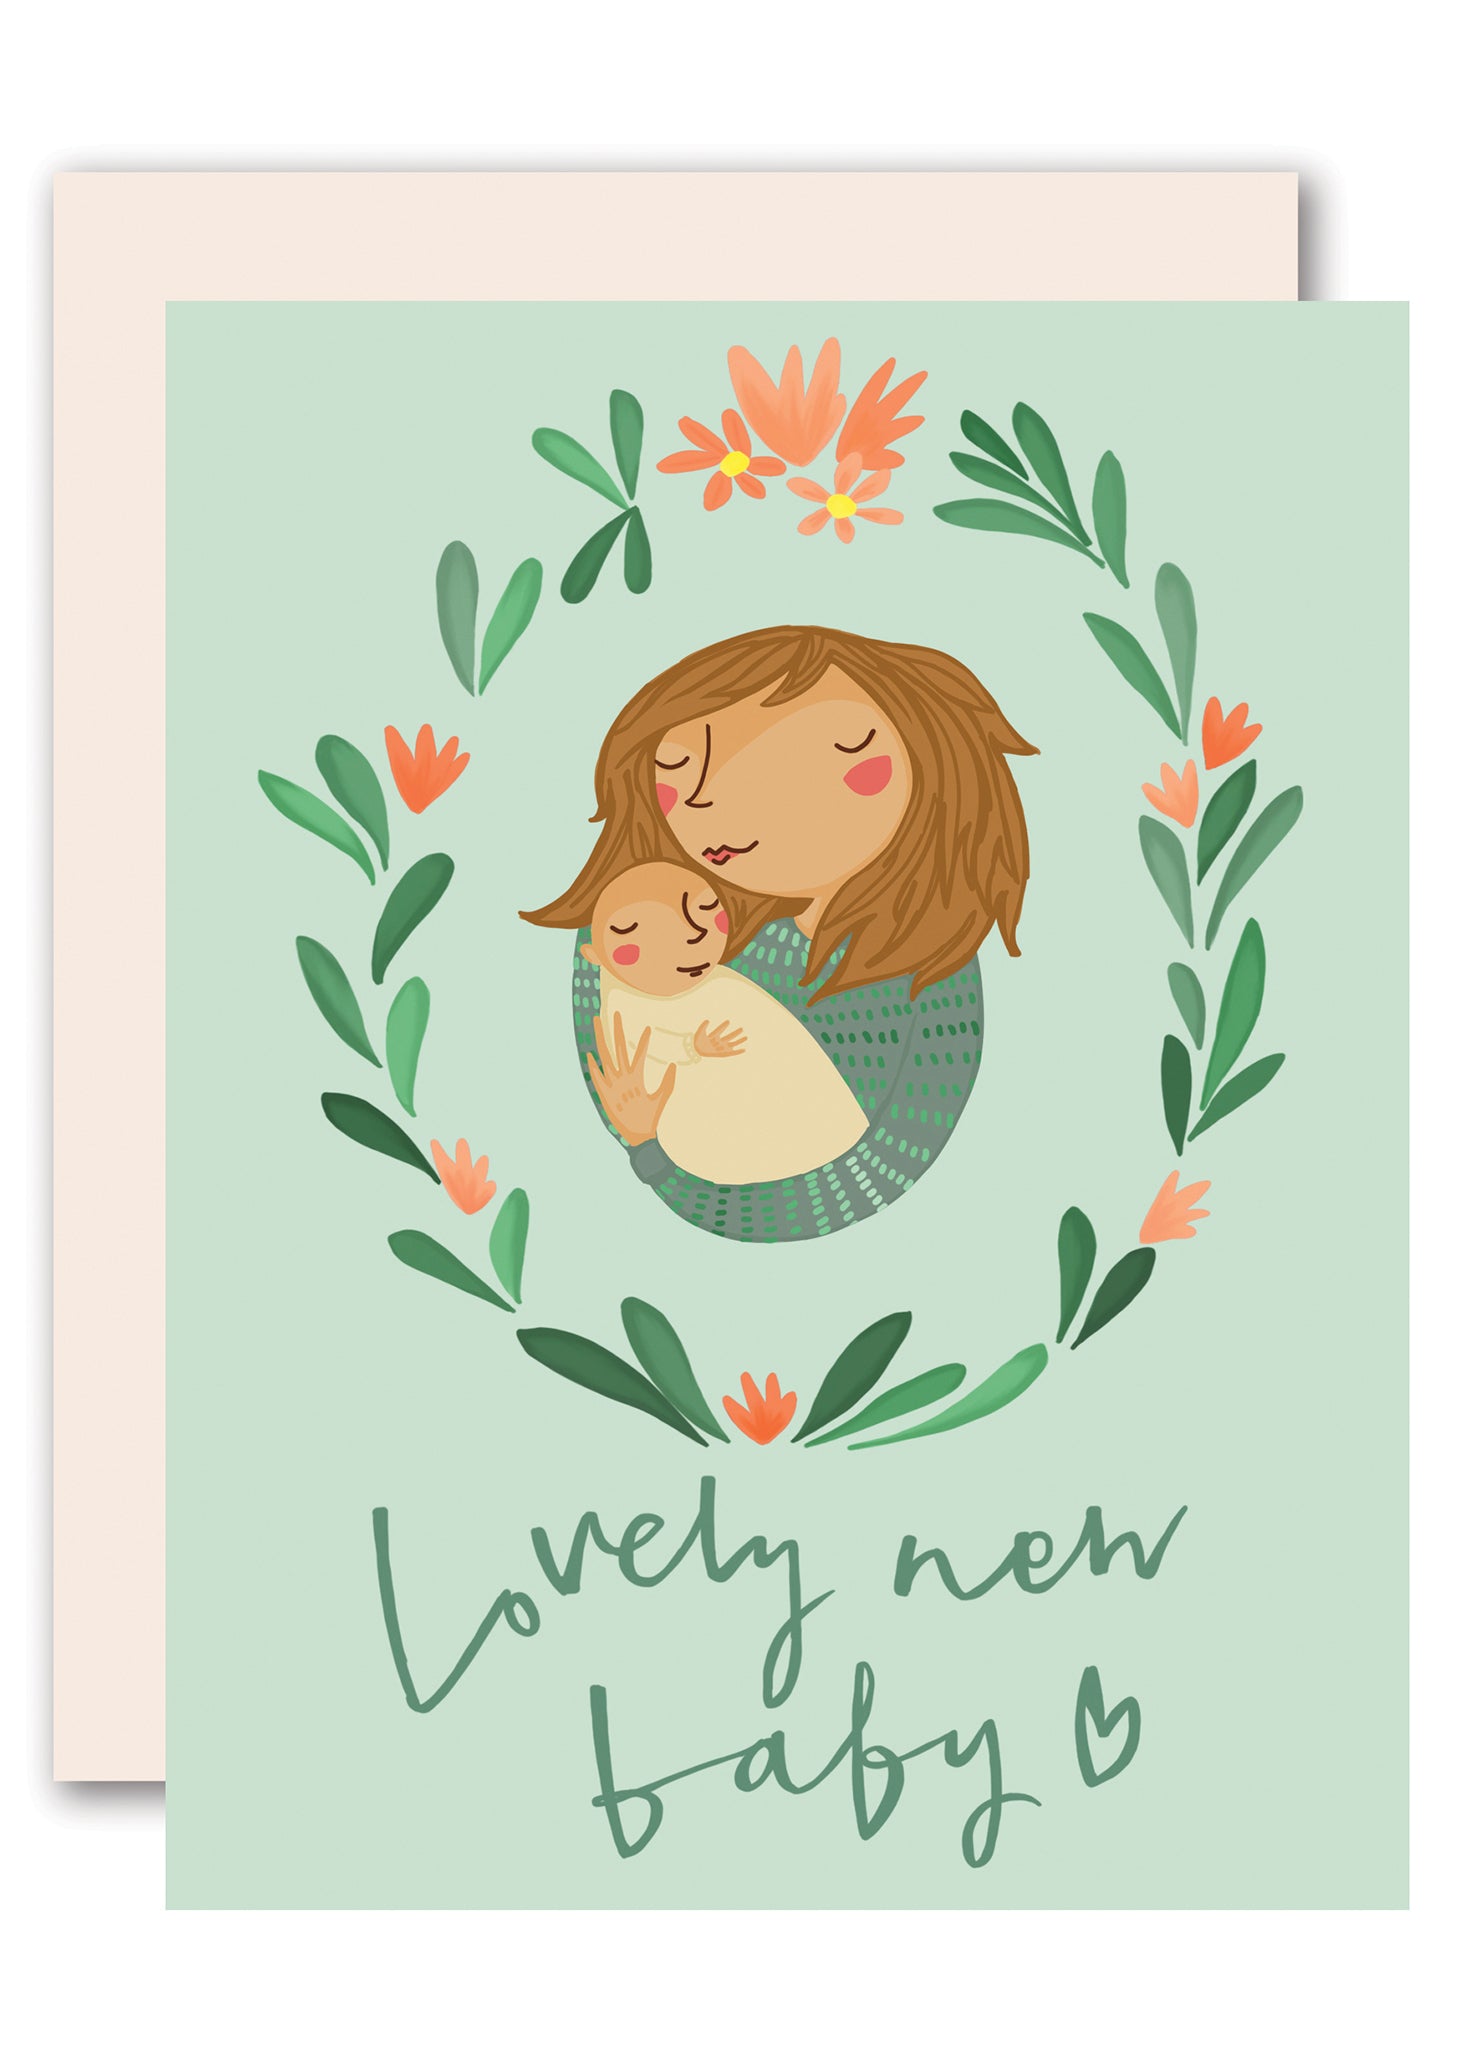 congratulations-new-baby-greeting-card-cards-invitations-home-garden